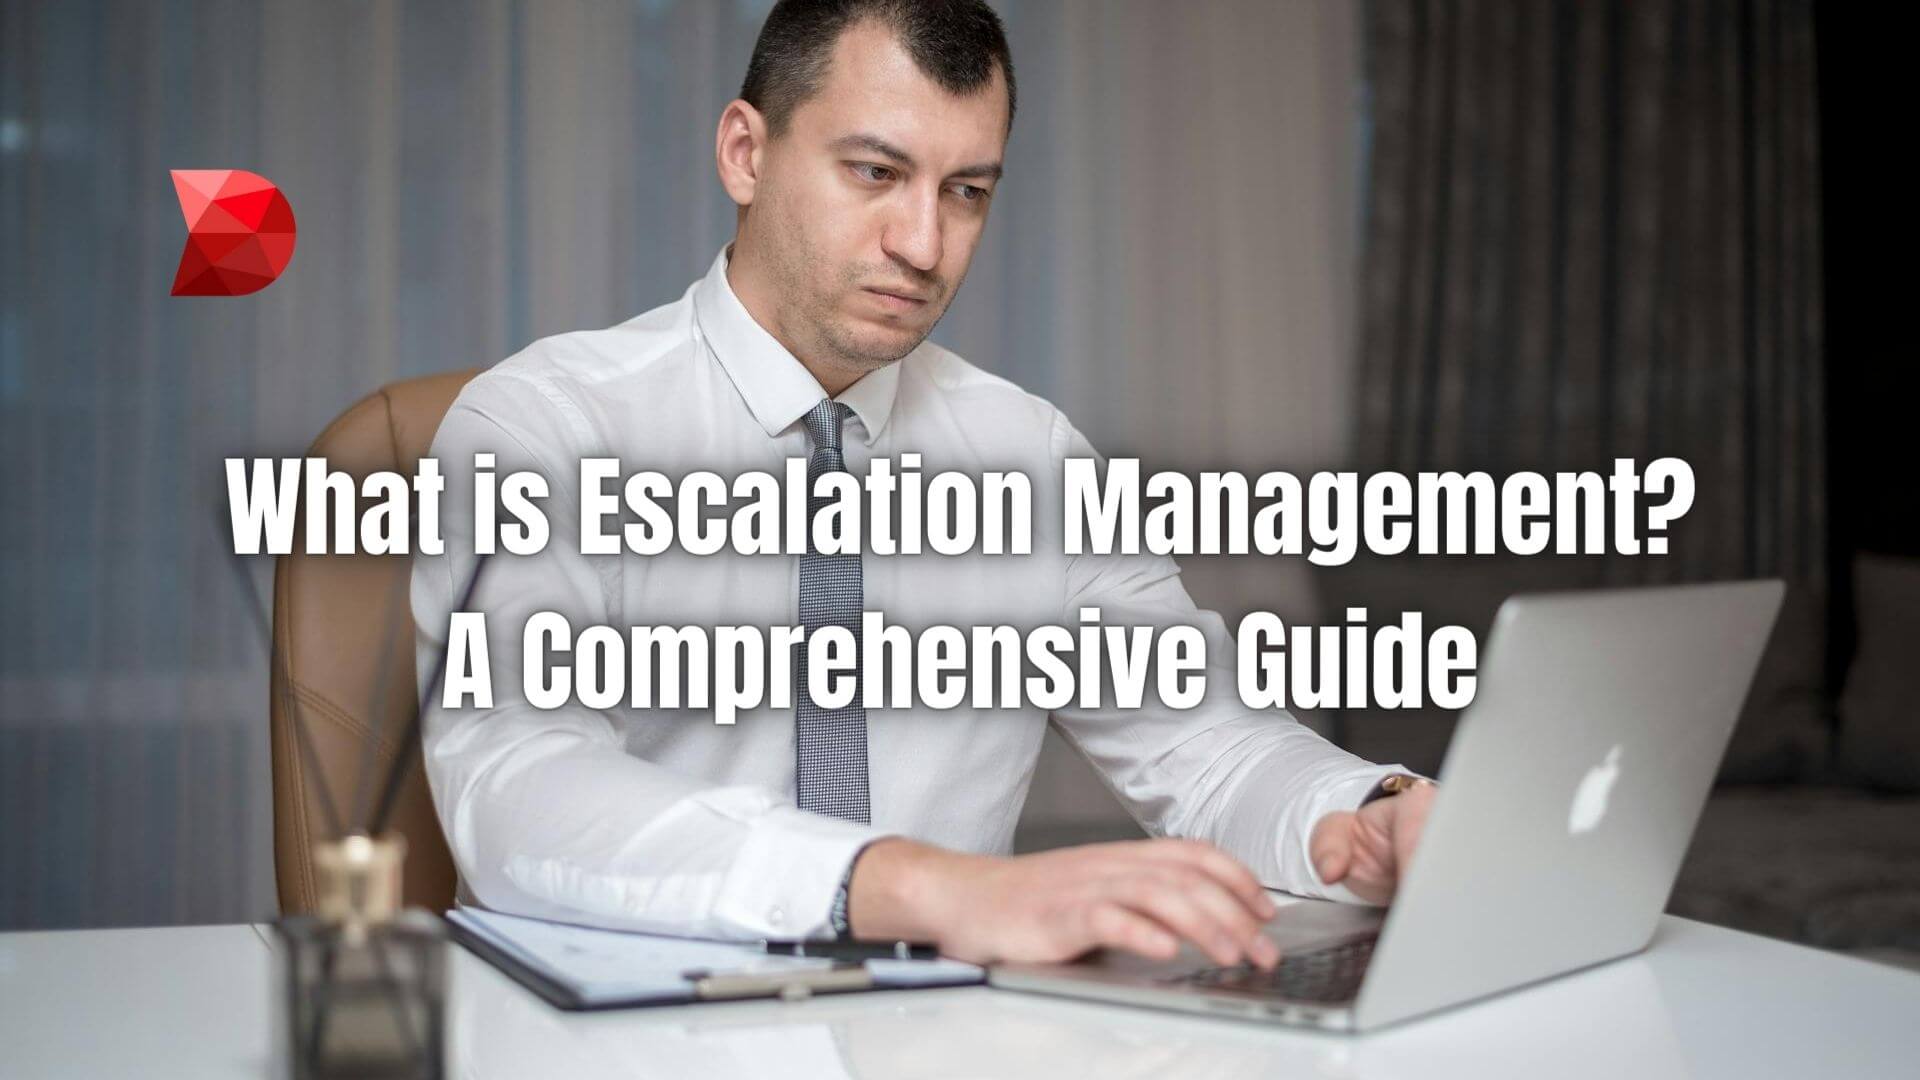 Unlock the power of escalation management with our full guide. Learn essential strategies and tactics to navigate any situation effectively.